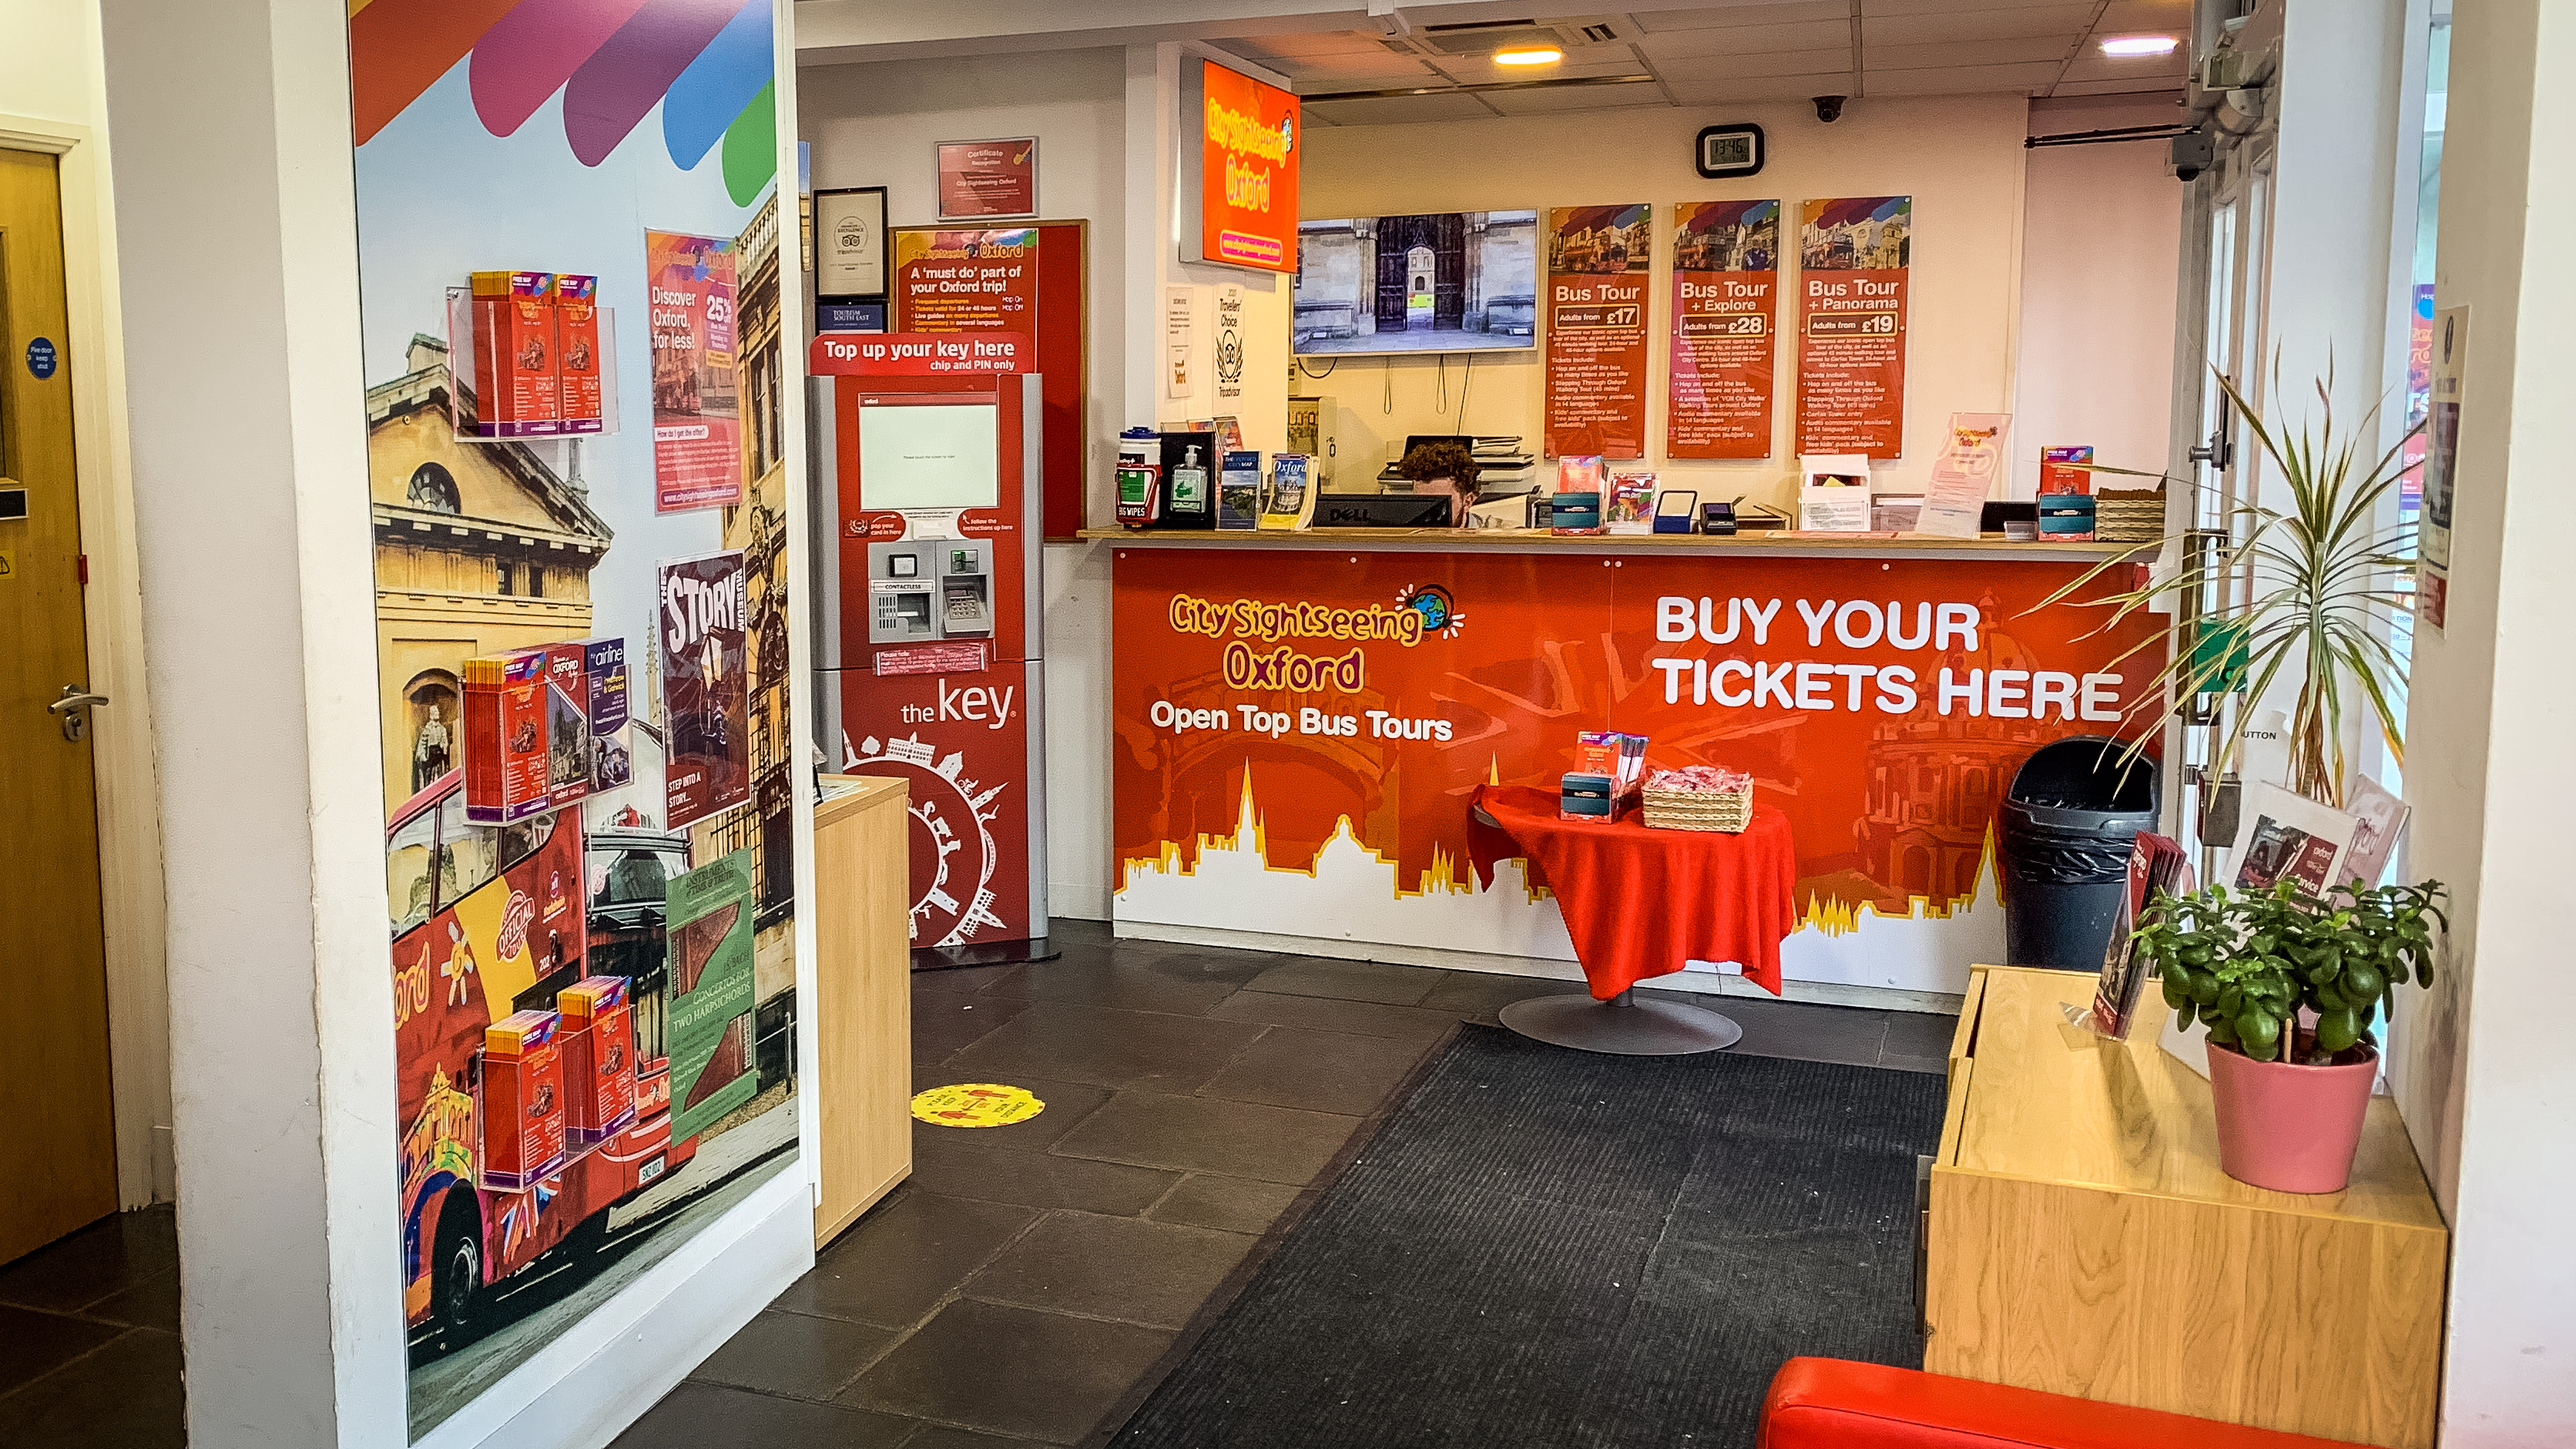 City Sightseeing Oxford Visitor Information Point